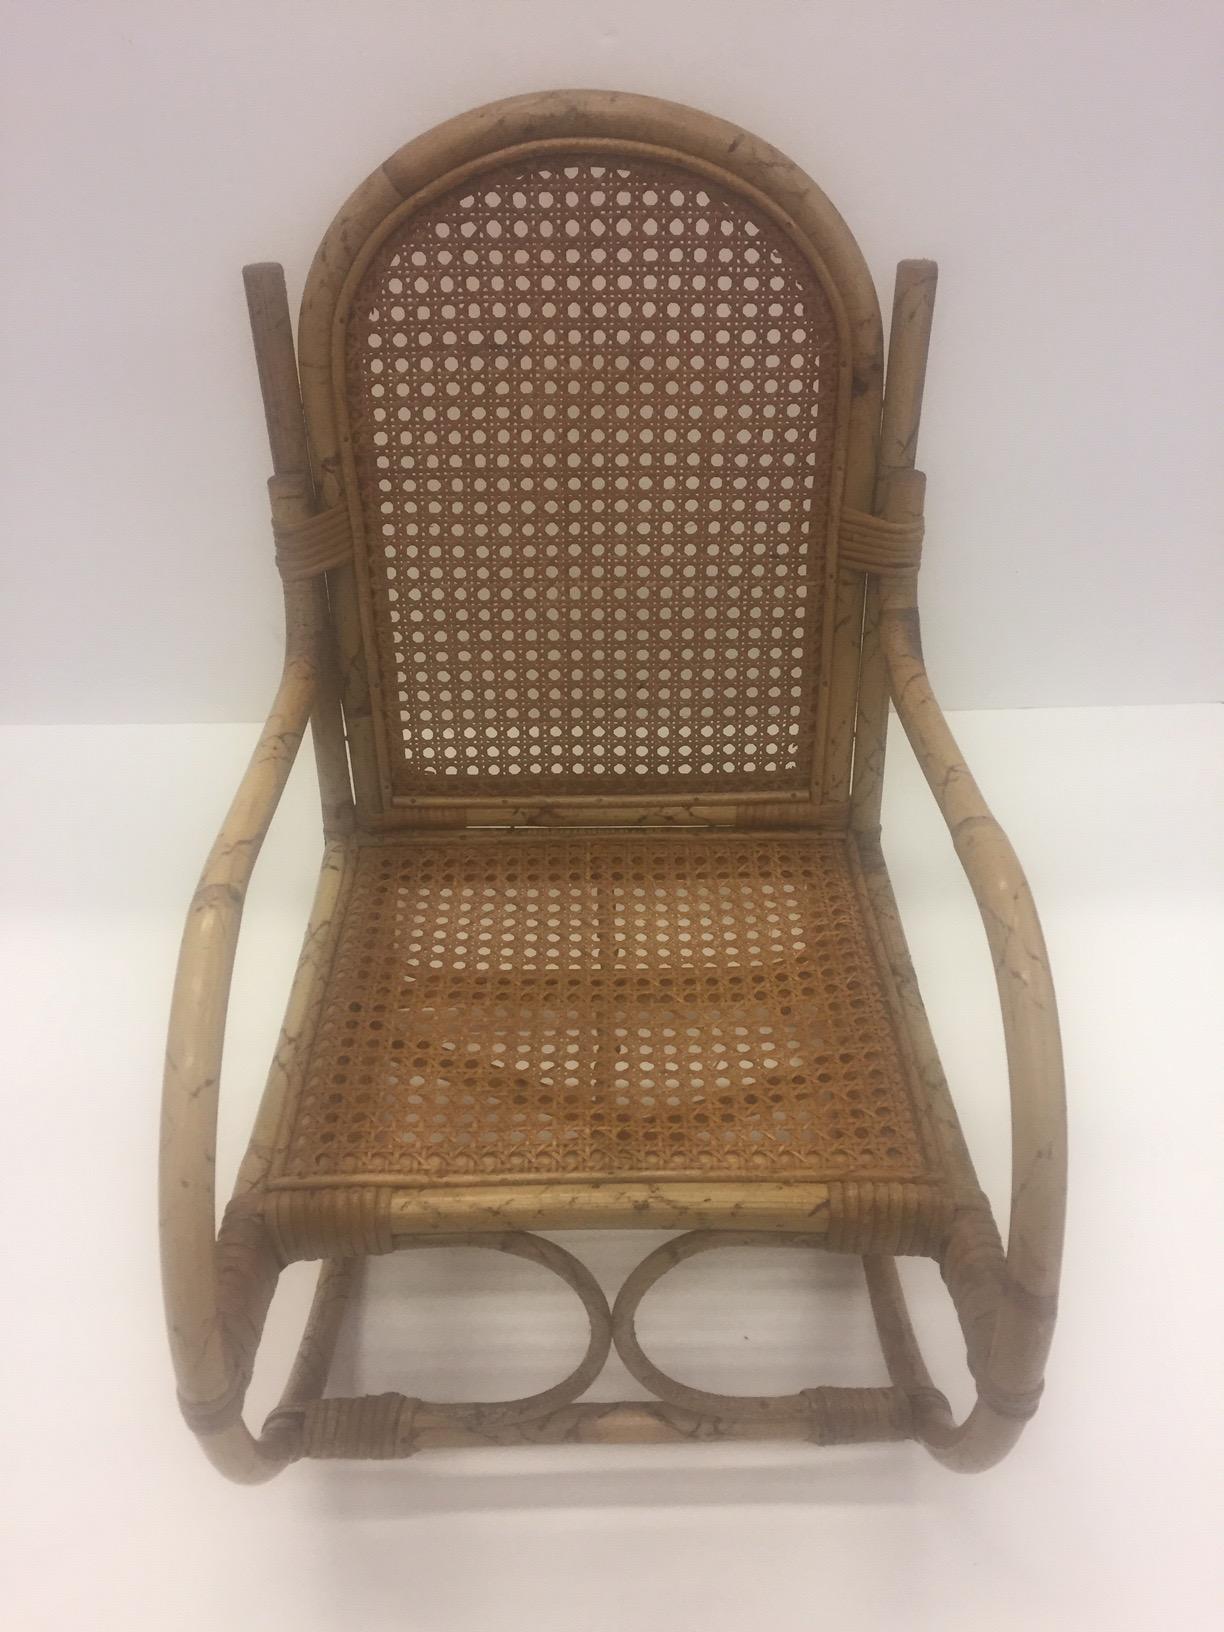 A pint sized rattan rocking chair for a lucky kid.